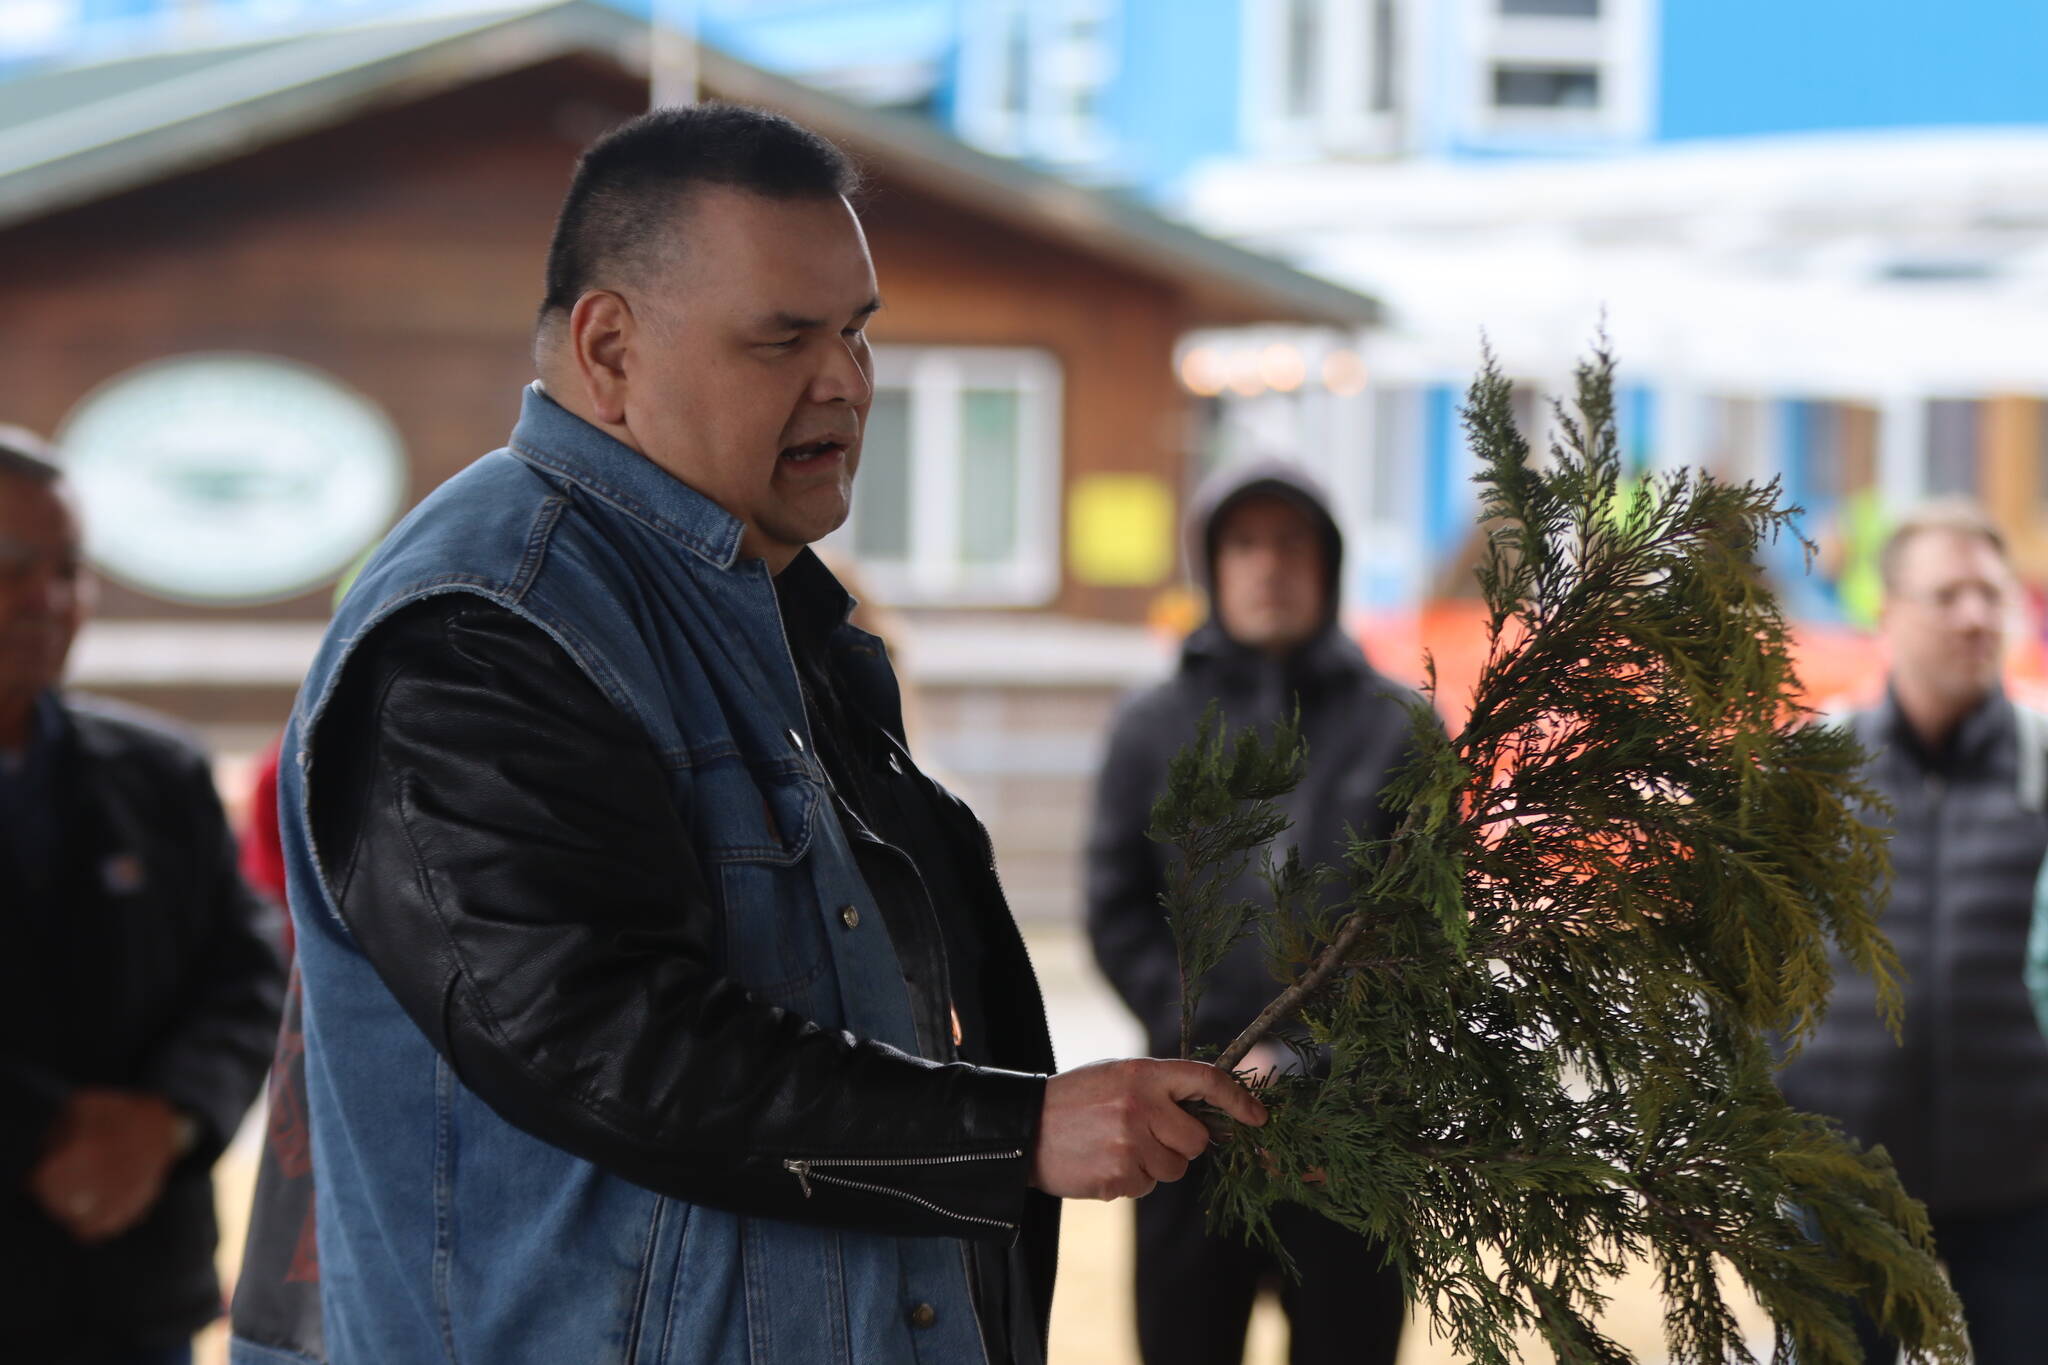 Alfie Price performs a traditional blessing of the ground on Friday at Marine Park where the Kootéeyaa Deiyí (Totem Pole Trail) will be installed by the end of April. (Jonson Kuhn / Juneau Empire)